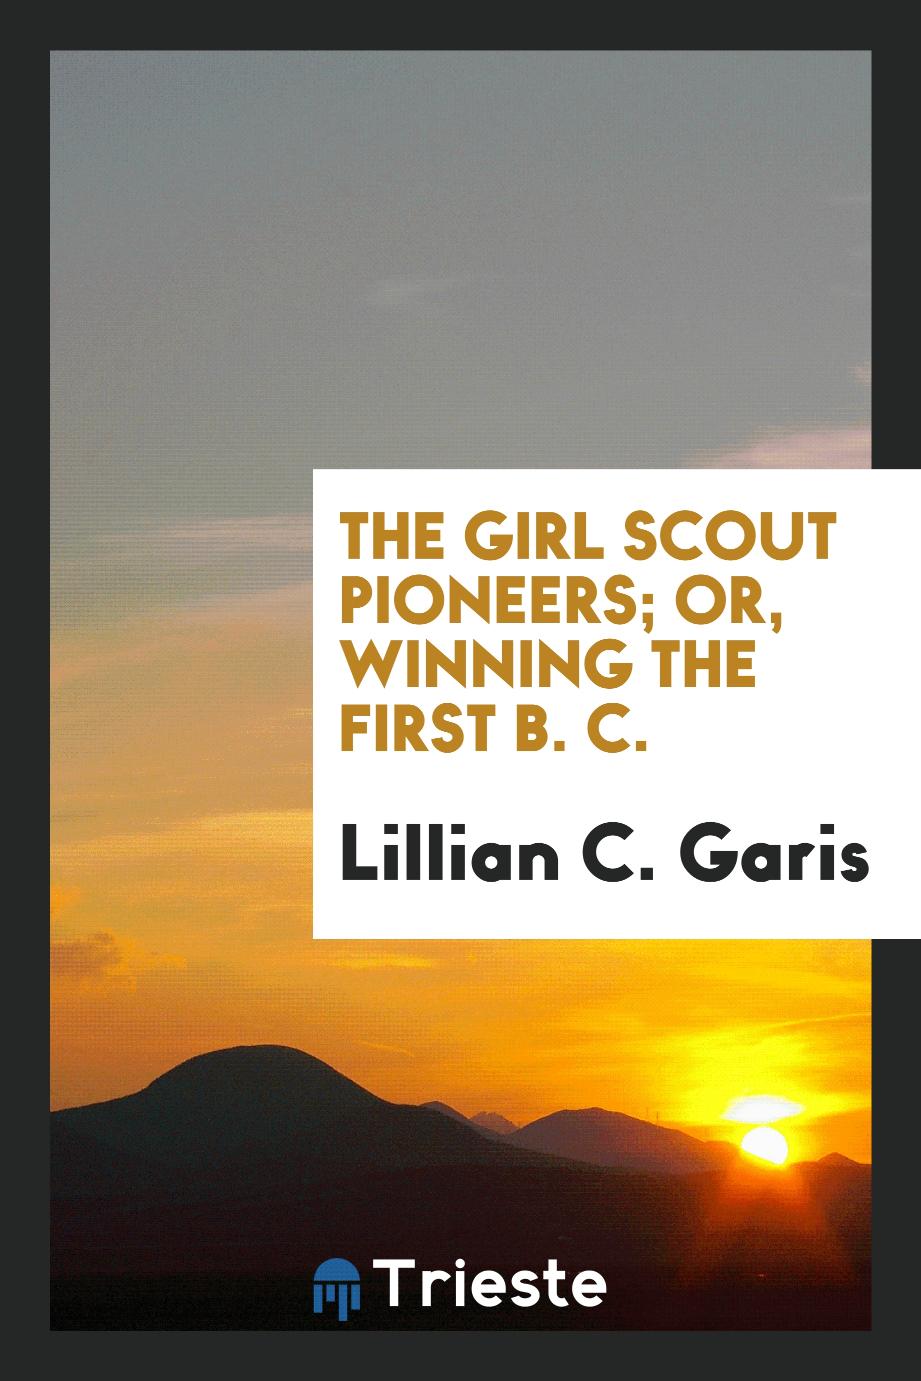 The girl scout pioneers; or, Winning the first B. C.